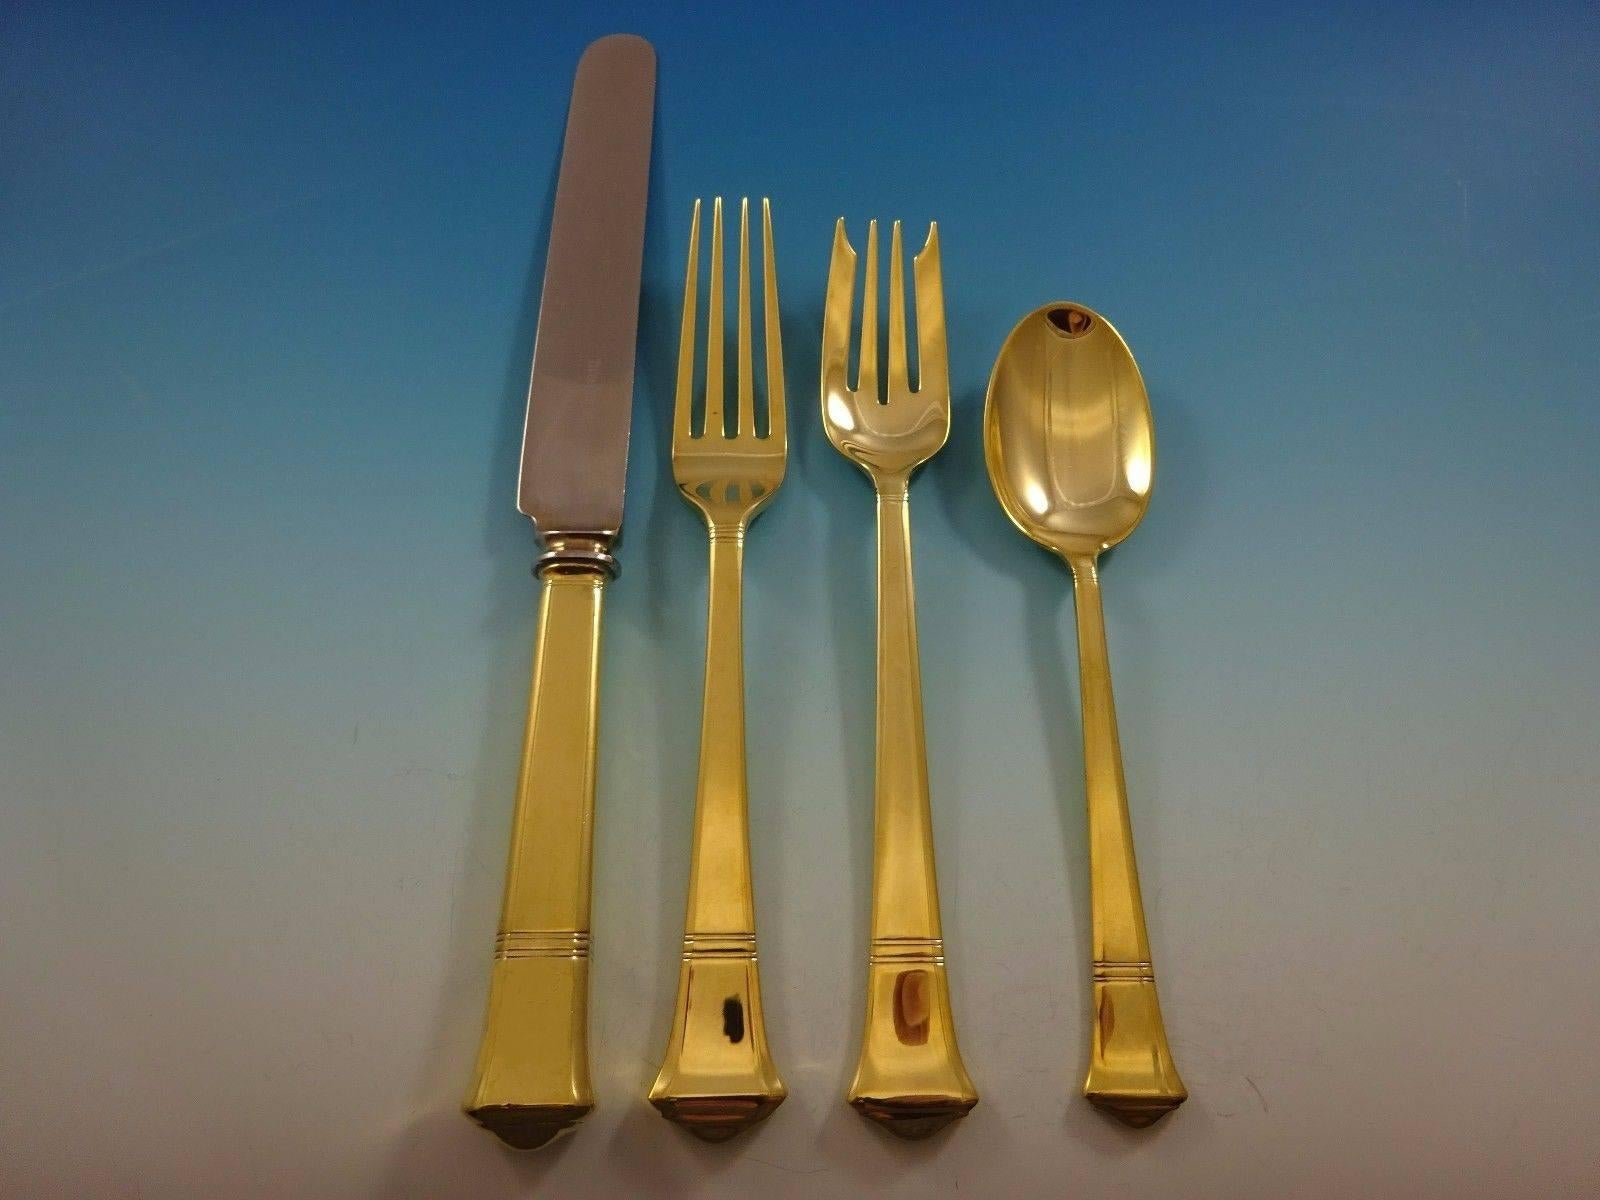 Windham Gold by Tiffany and Co. sterling silver flatware set of 24 pieces. This set is vermeil (completely gold-washed) and includes: 

Six knives, 9 3/8